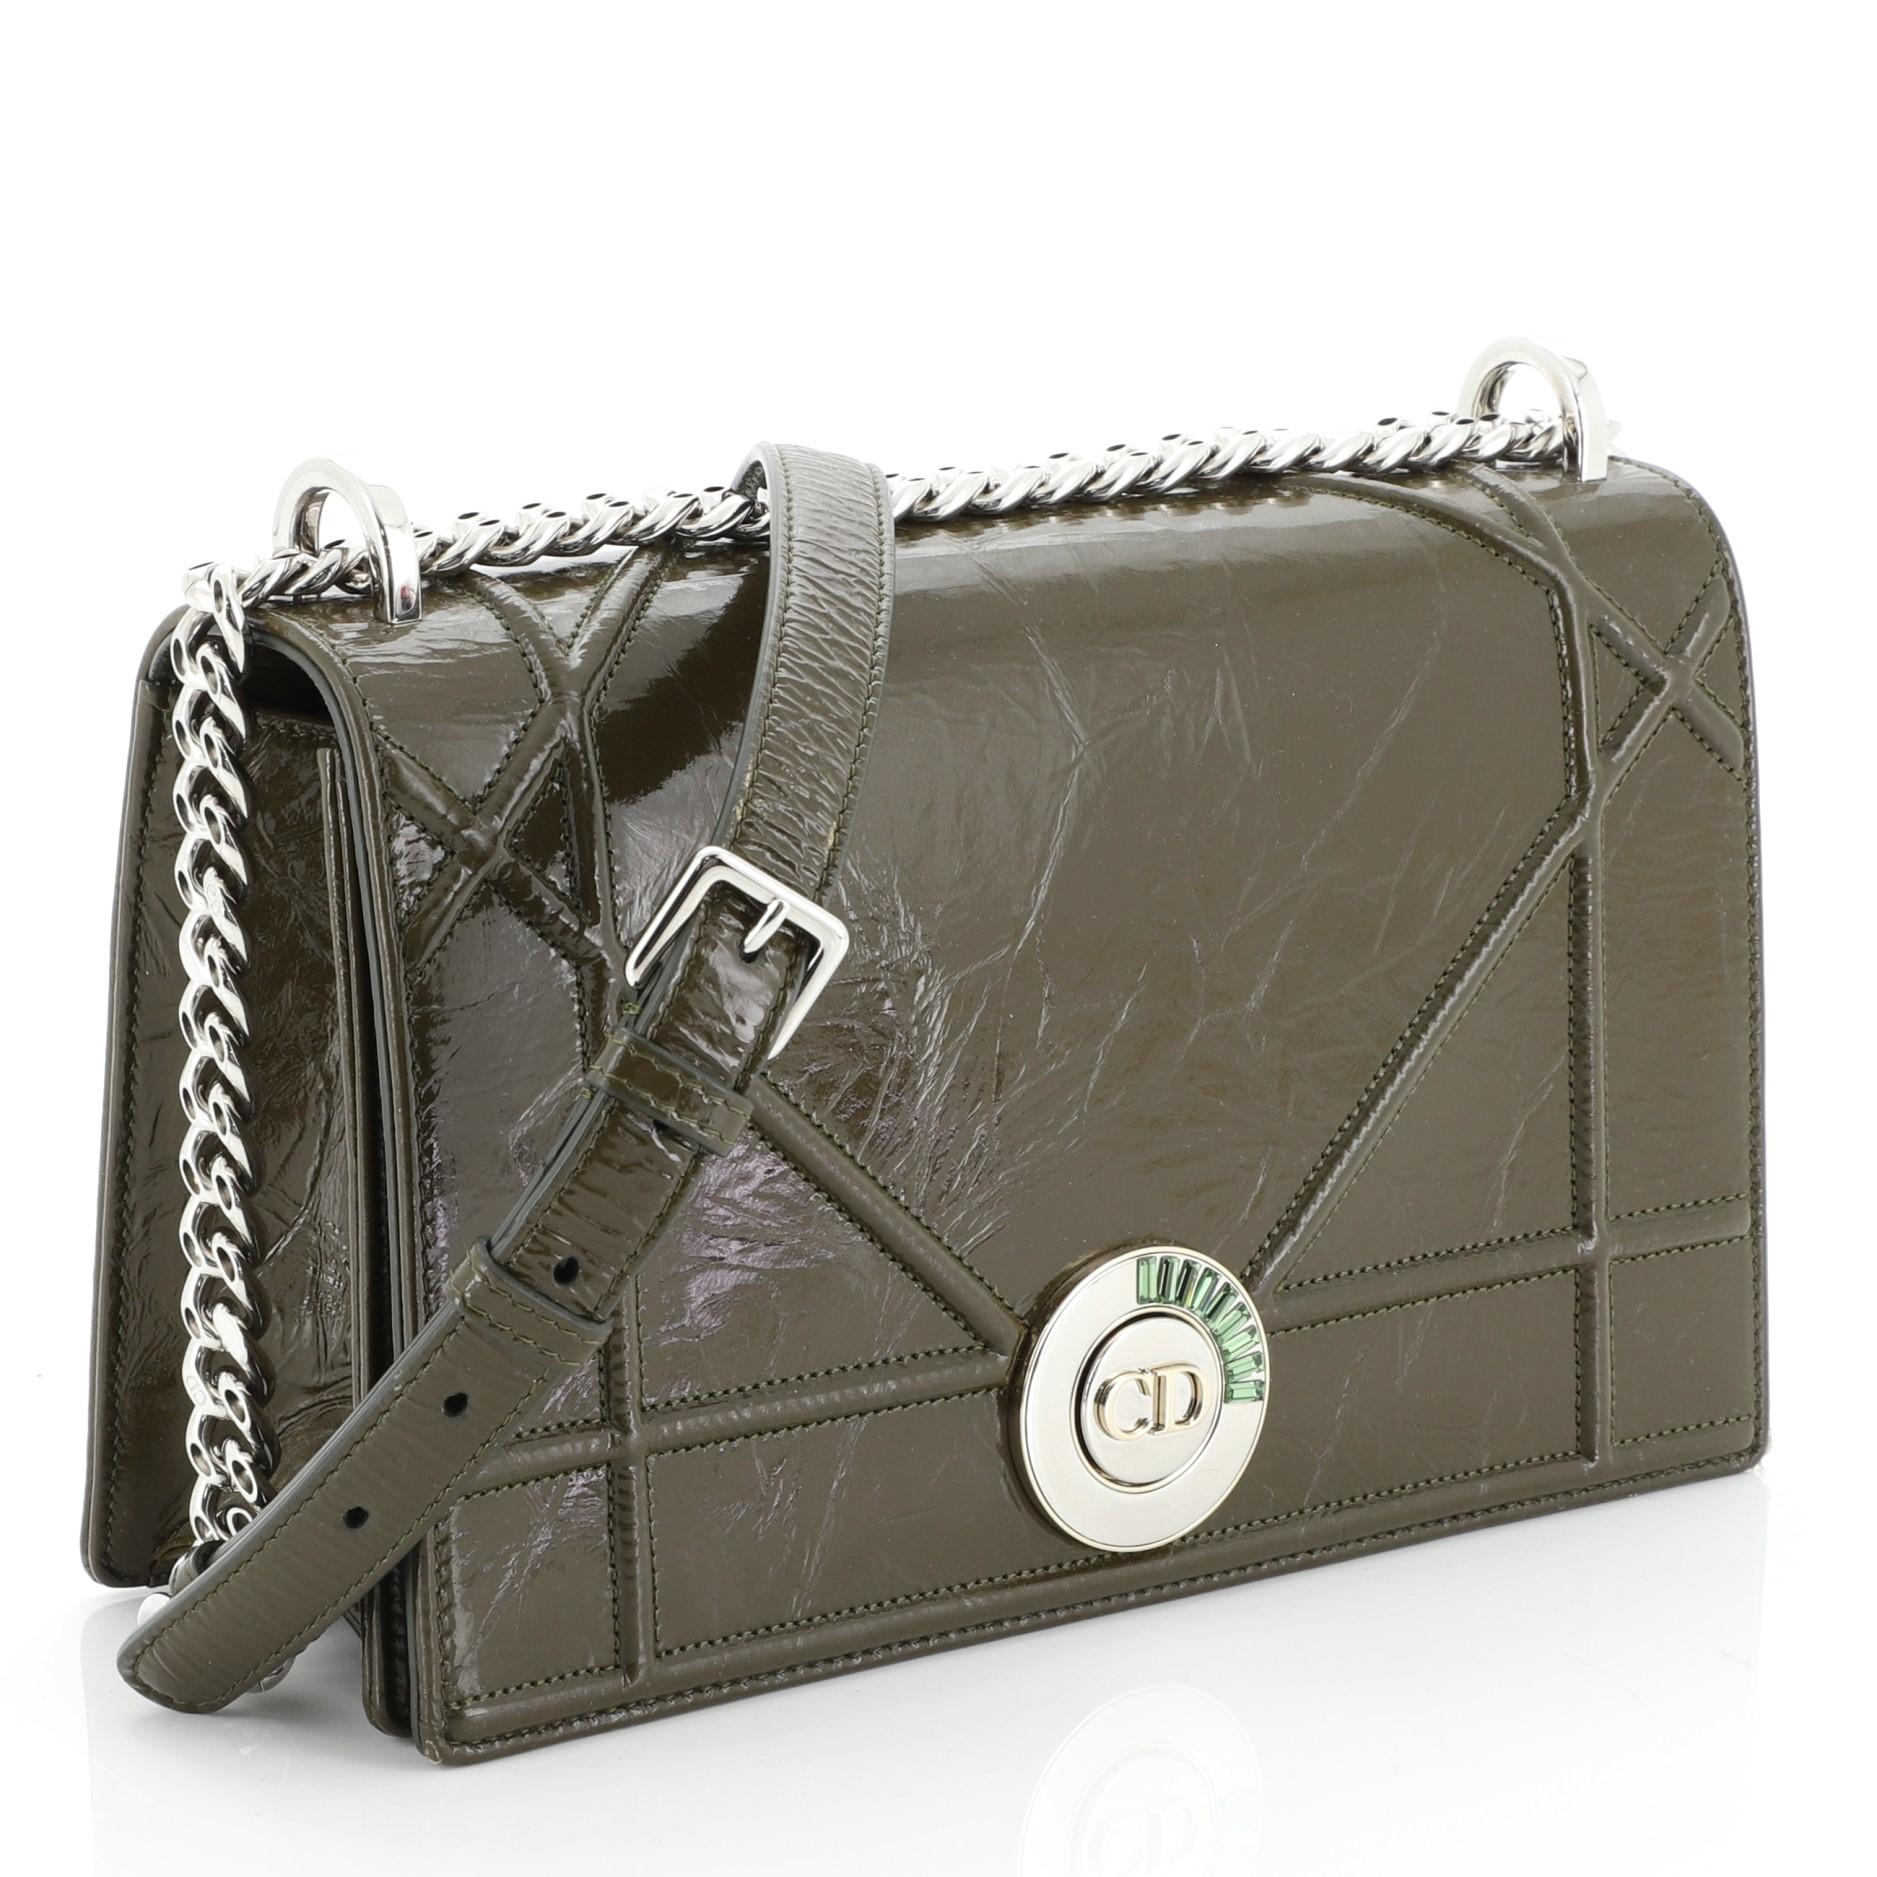 This Christian Dior Diorama Clasp Flap Bag Crinkled Lambskin Medium, crafted from green crinkled lambskin leather, features oversized graphic-style cannage quilting, chain link strap with leather pad, and silver-tone hardware. Its CD round clasp